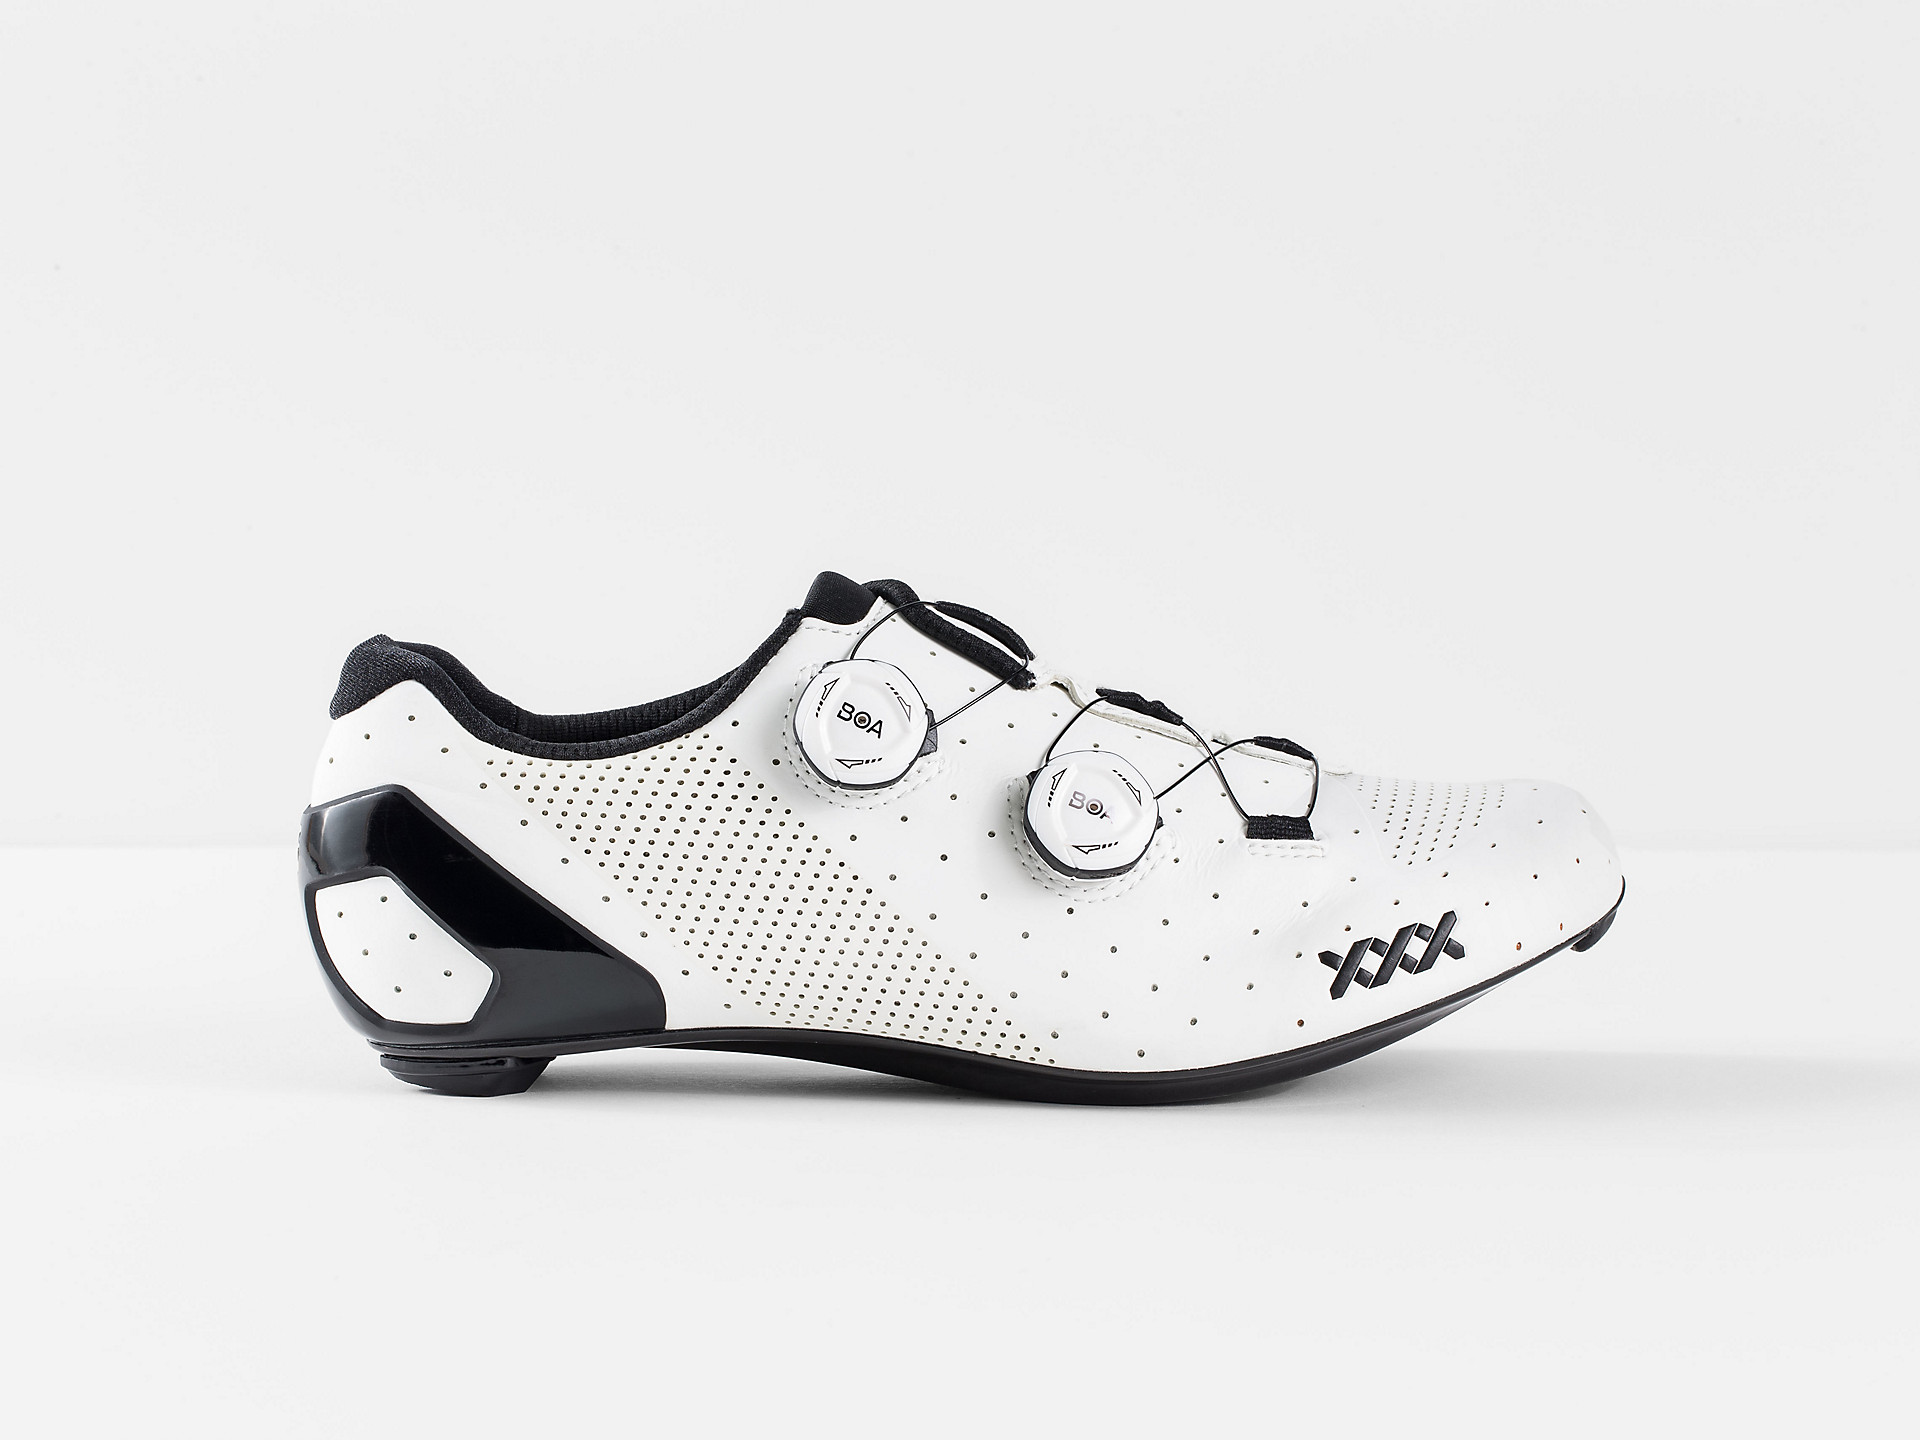 Details about   Ultralight Cycling Shoes Athletic Racing Road Bike Sneakers Men's Spin Cleats 